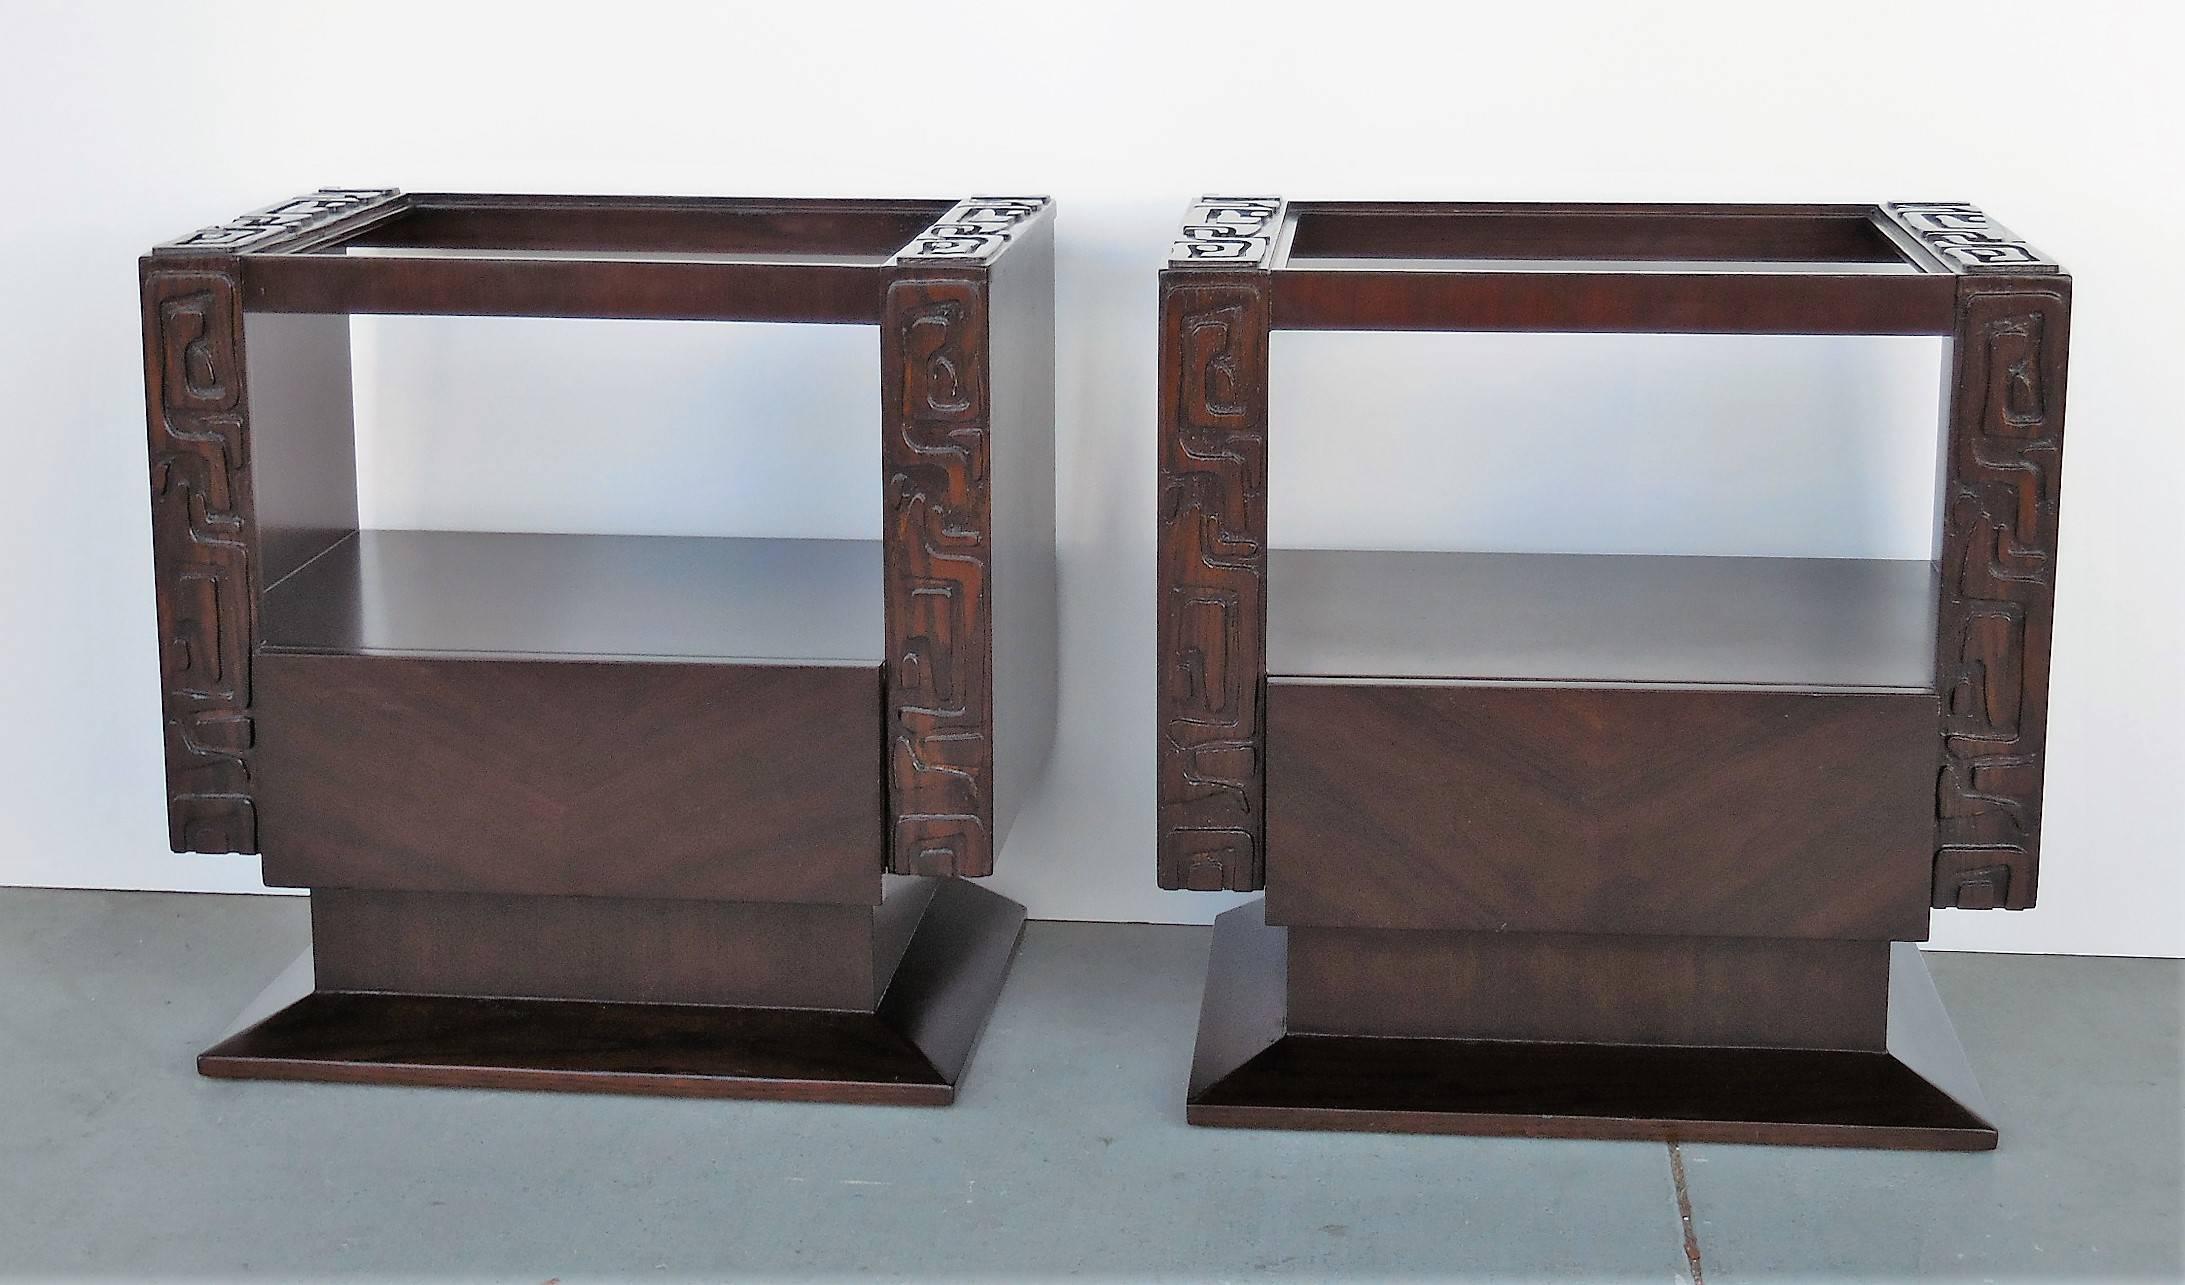 American Midcentury Nightstands Bedside Tables with Abstract Carving, a Pair